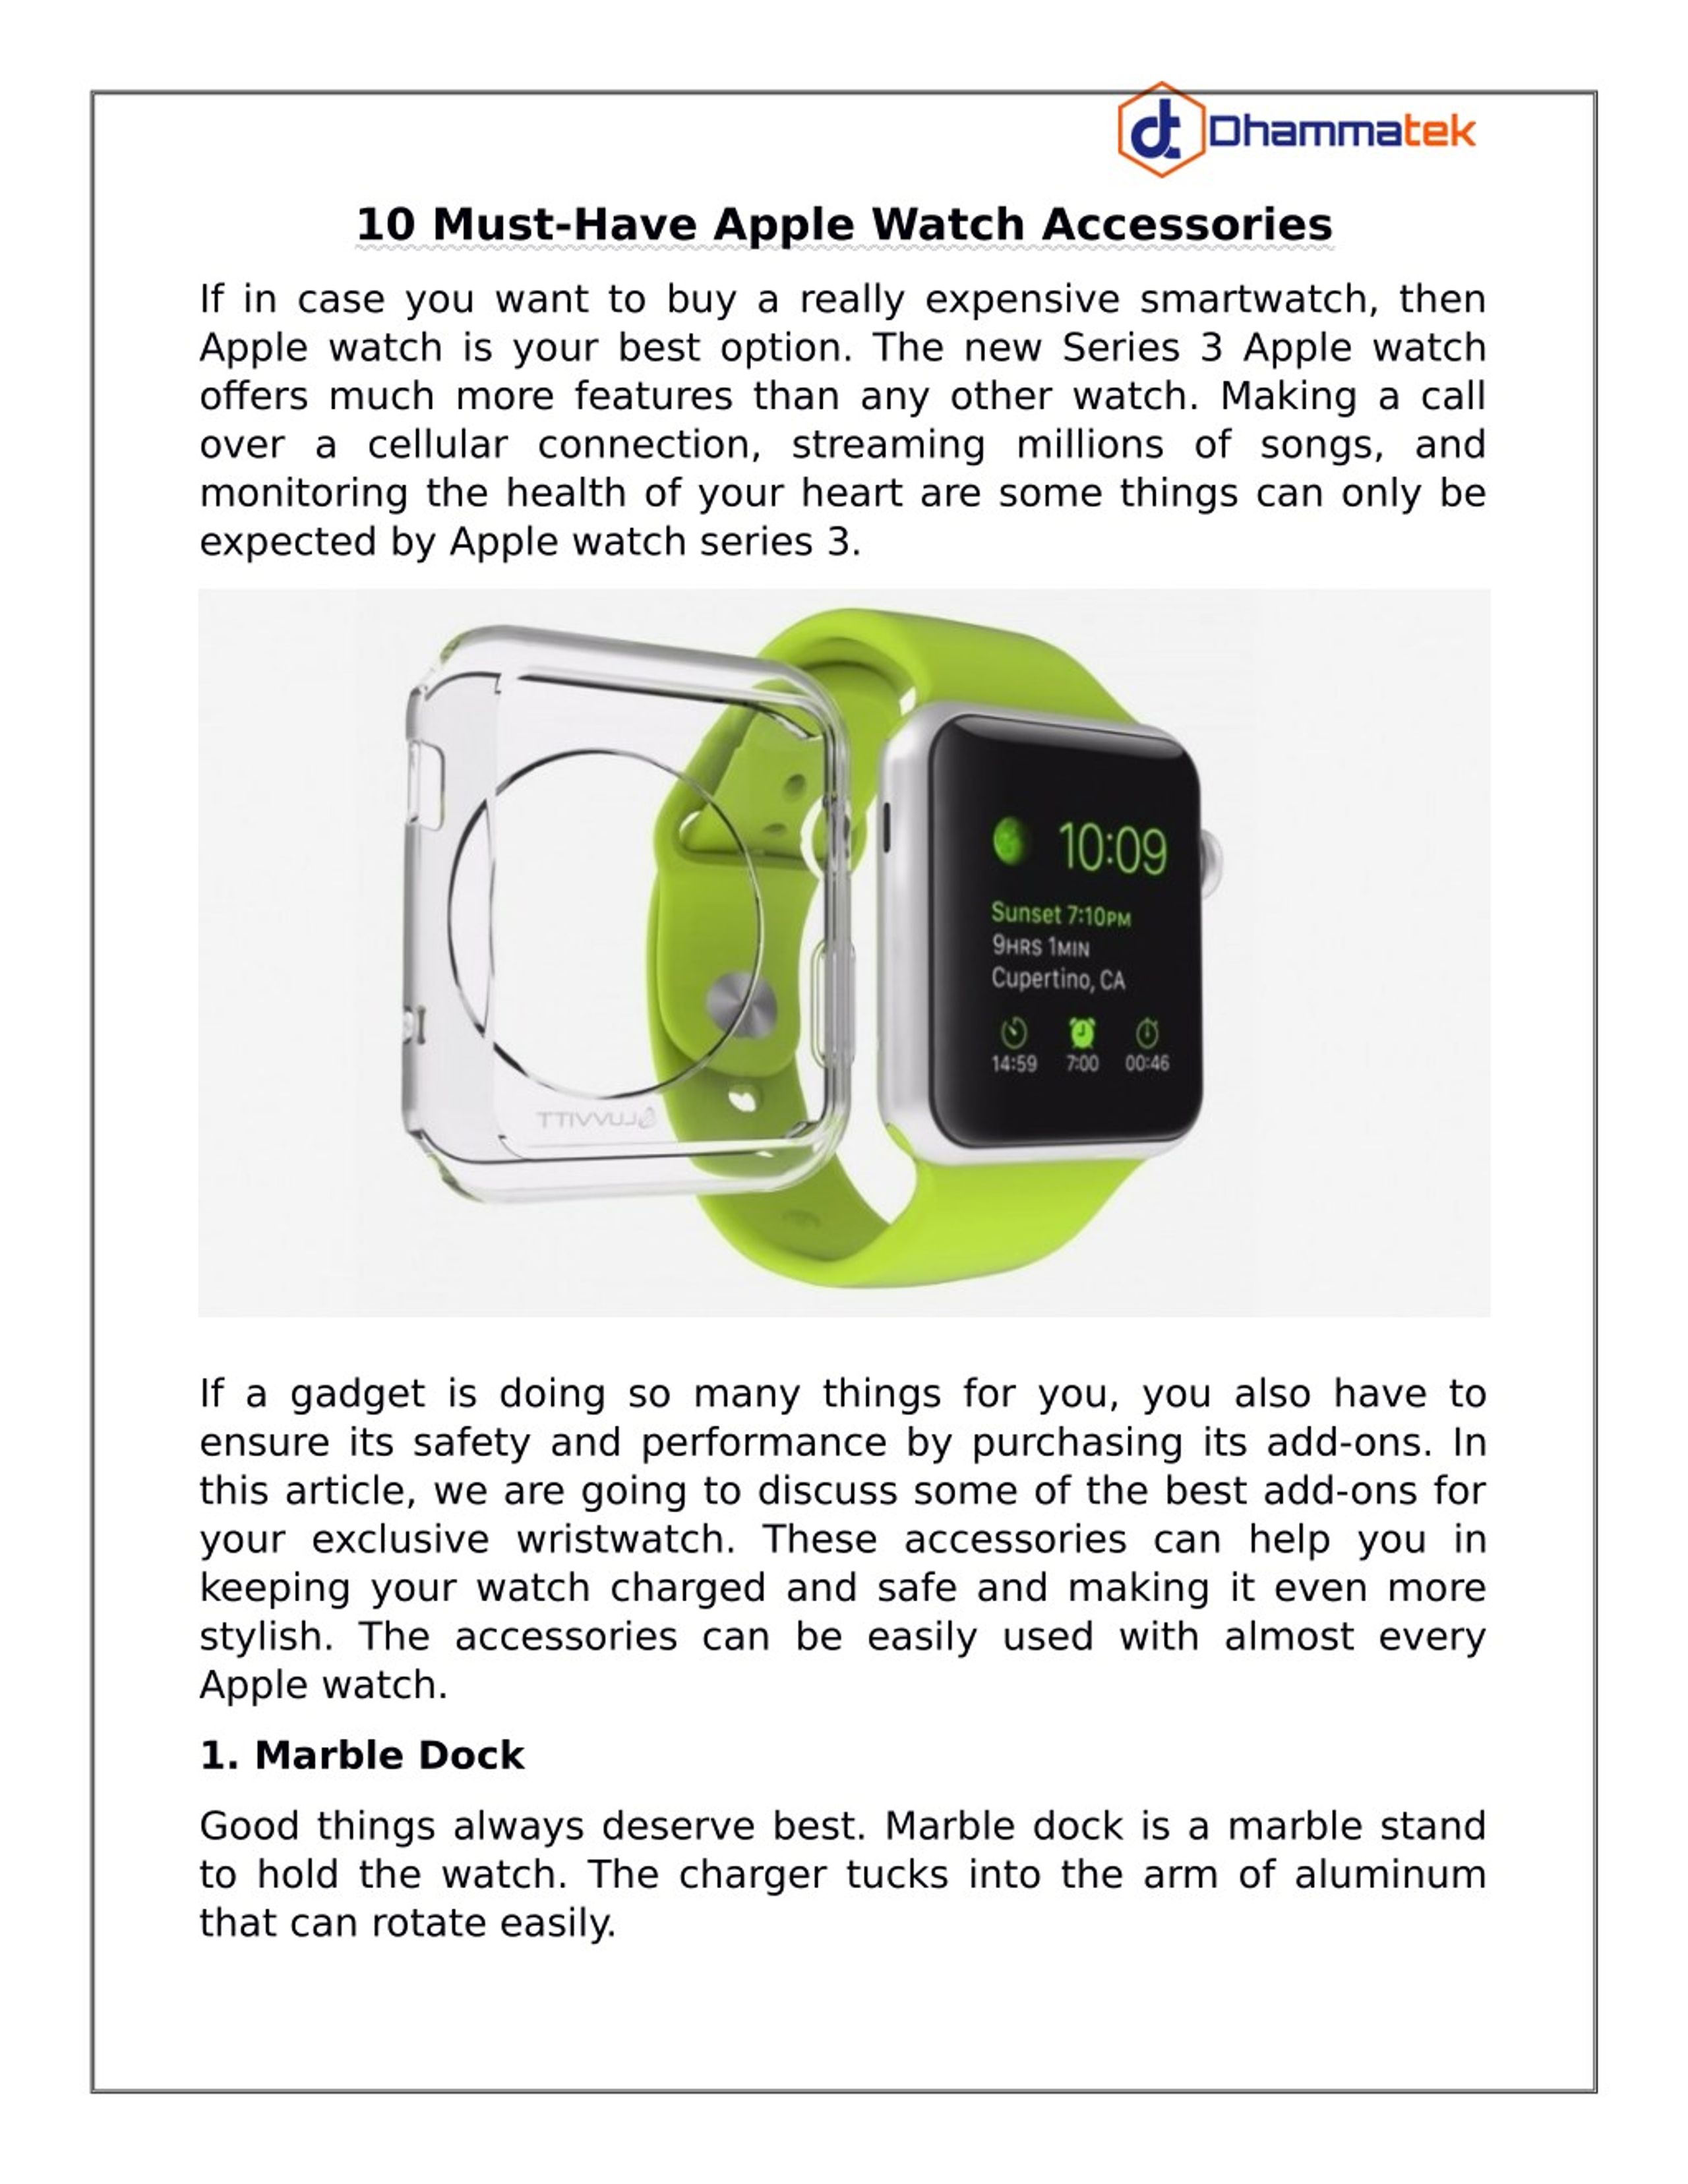 PPT - 10 Must-Have Apple Watch Accessories PowerPoint Presentation